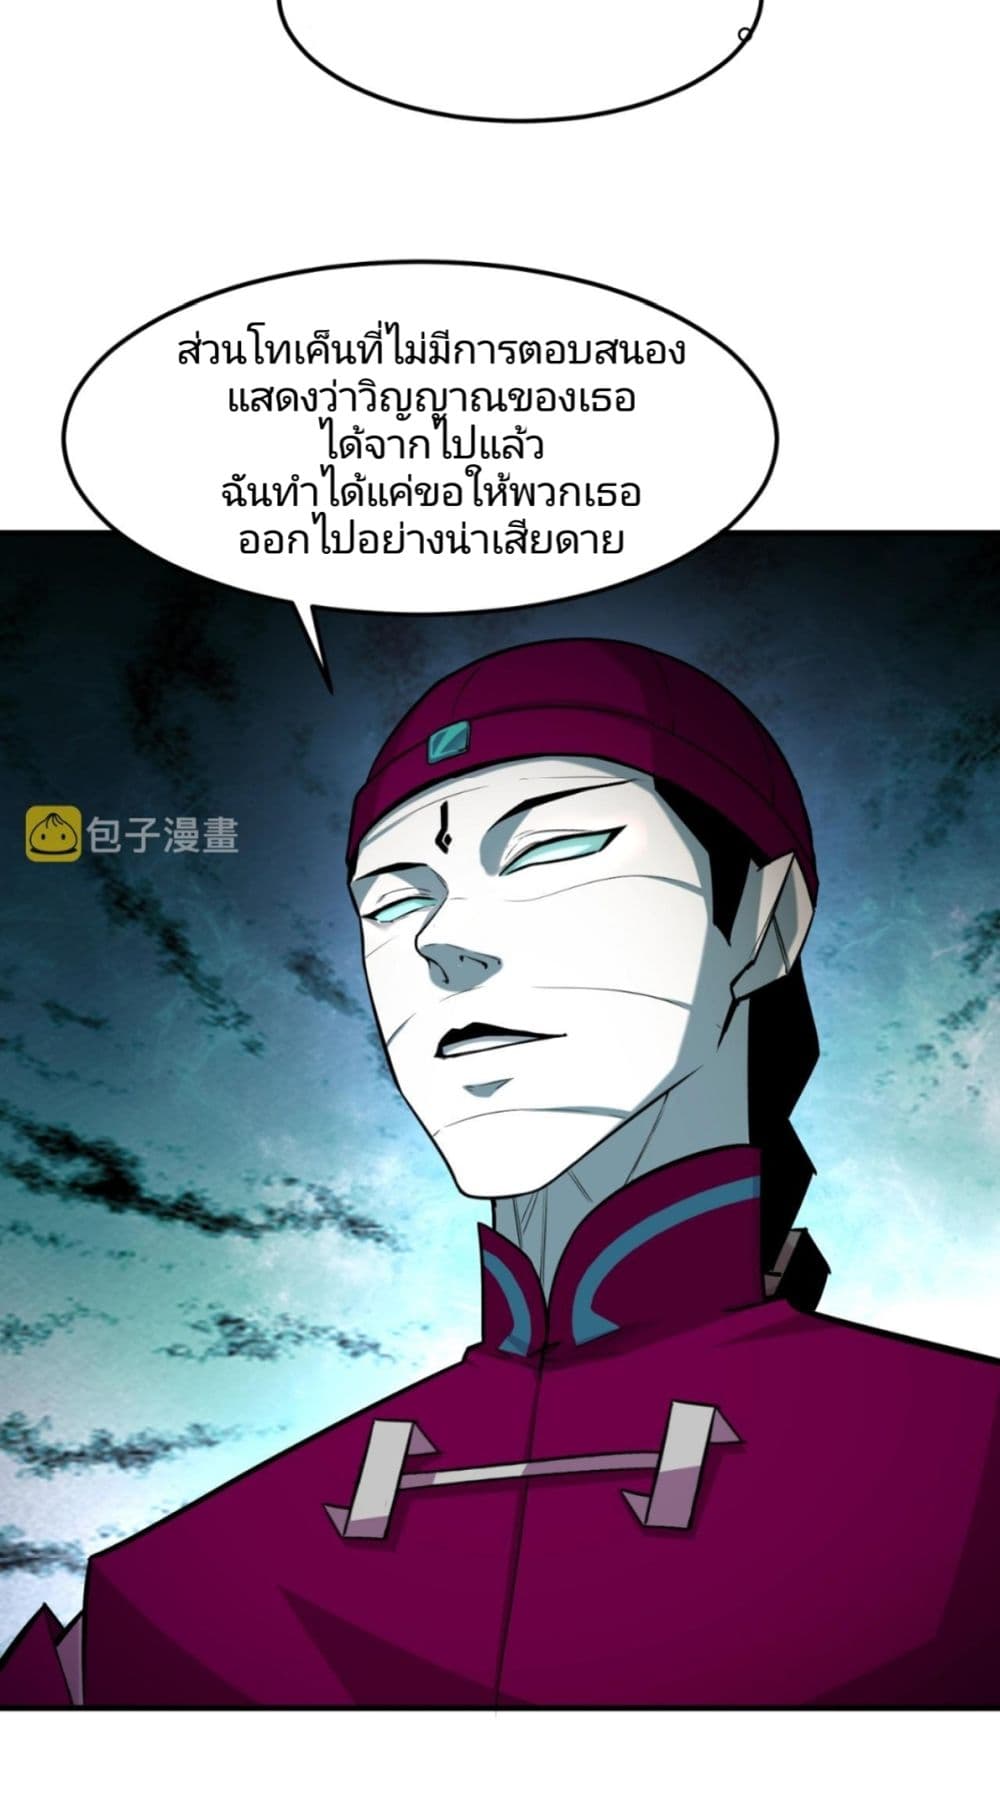 The Age of Ghost Spirits à¸à¸­à¸à¸à¸µà¹ 1 (28)